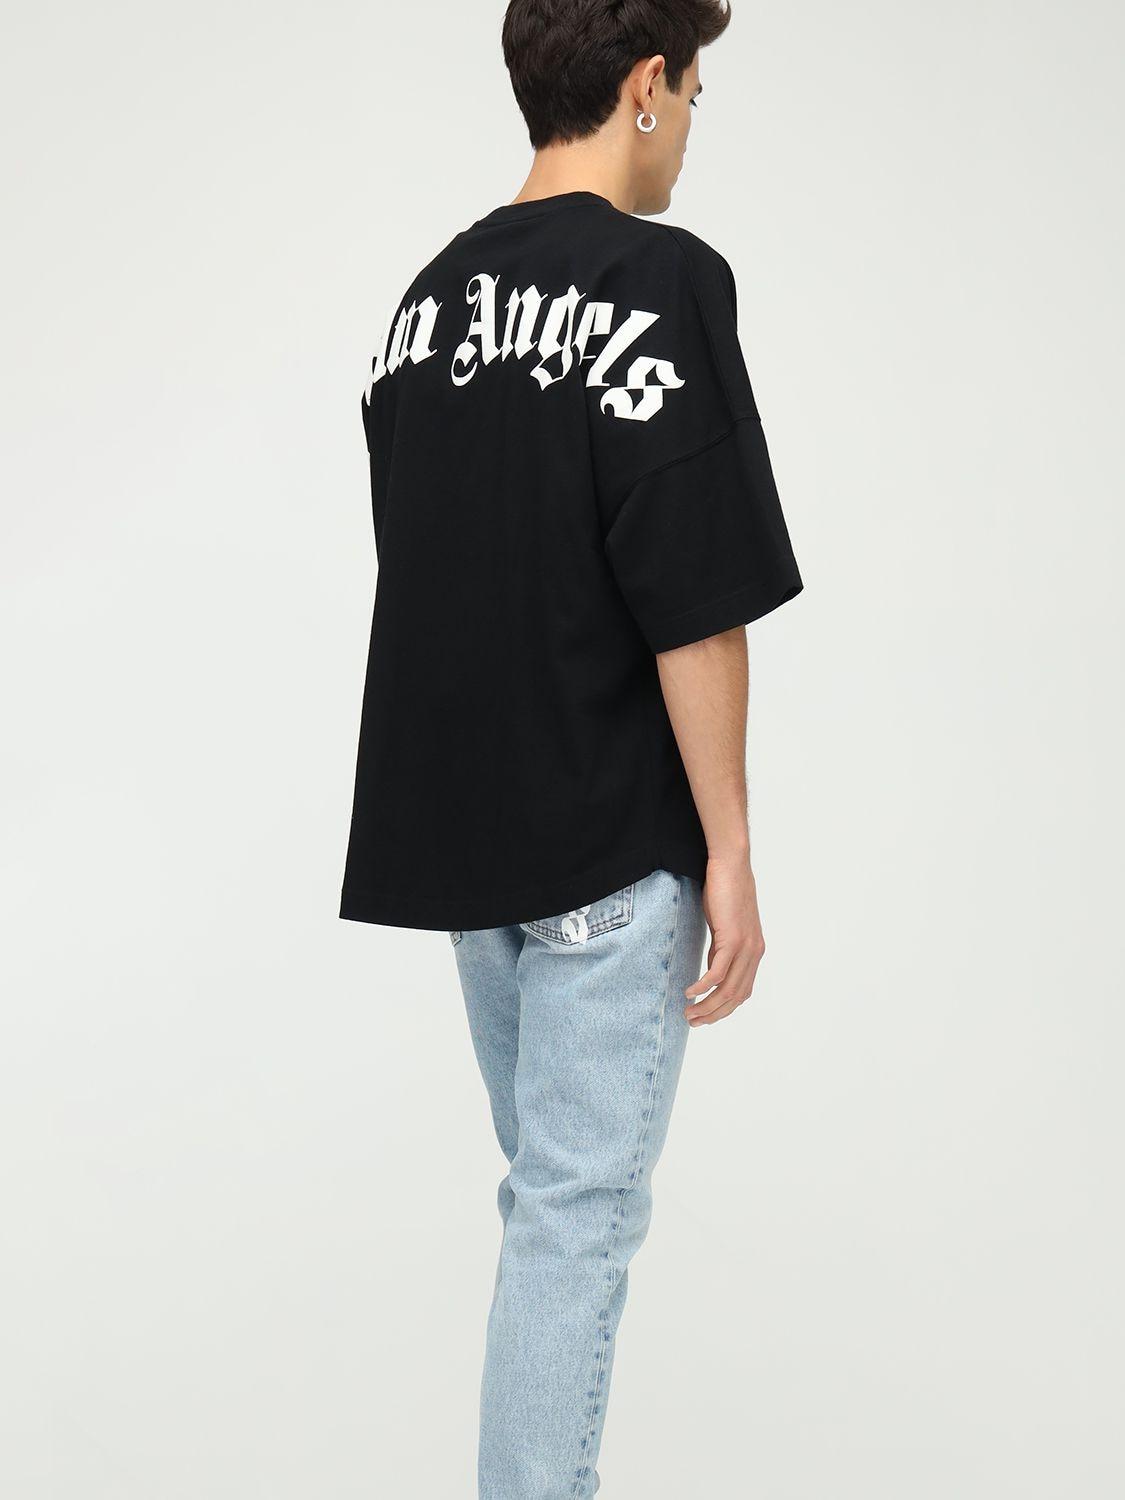 Palm Angels Logo Print Over Cotton Jersey T-shirt in Black/White 